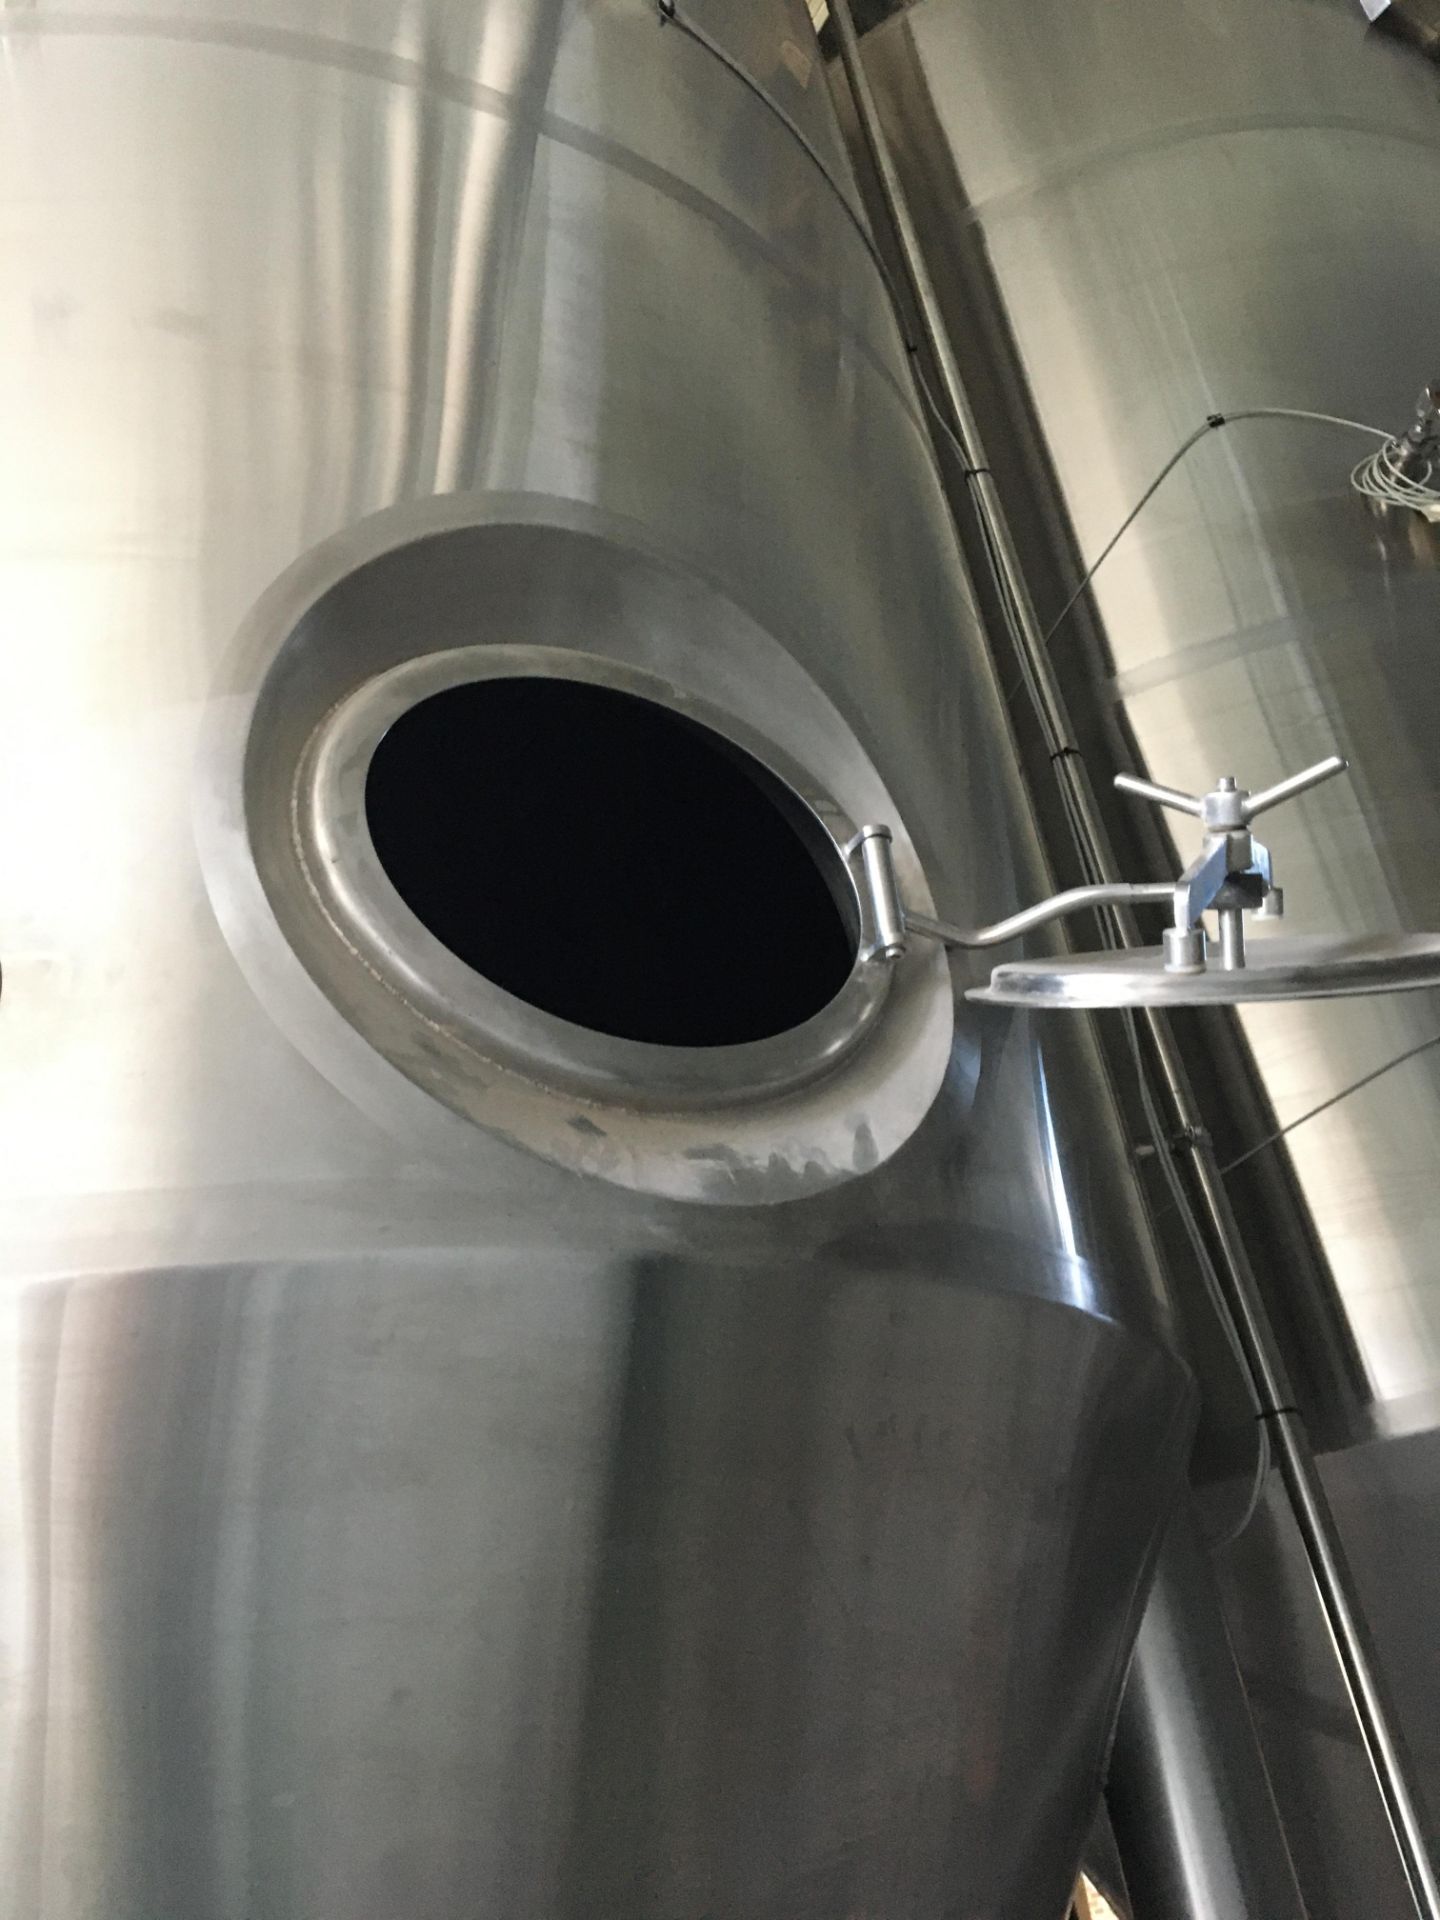 80-BBL Minnetonka Fermentation Tank, Model 80-BBL, Year 2017, Stainless Steel; Vessel store wort and - Image 6 of 9